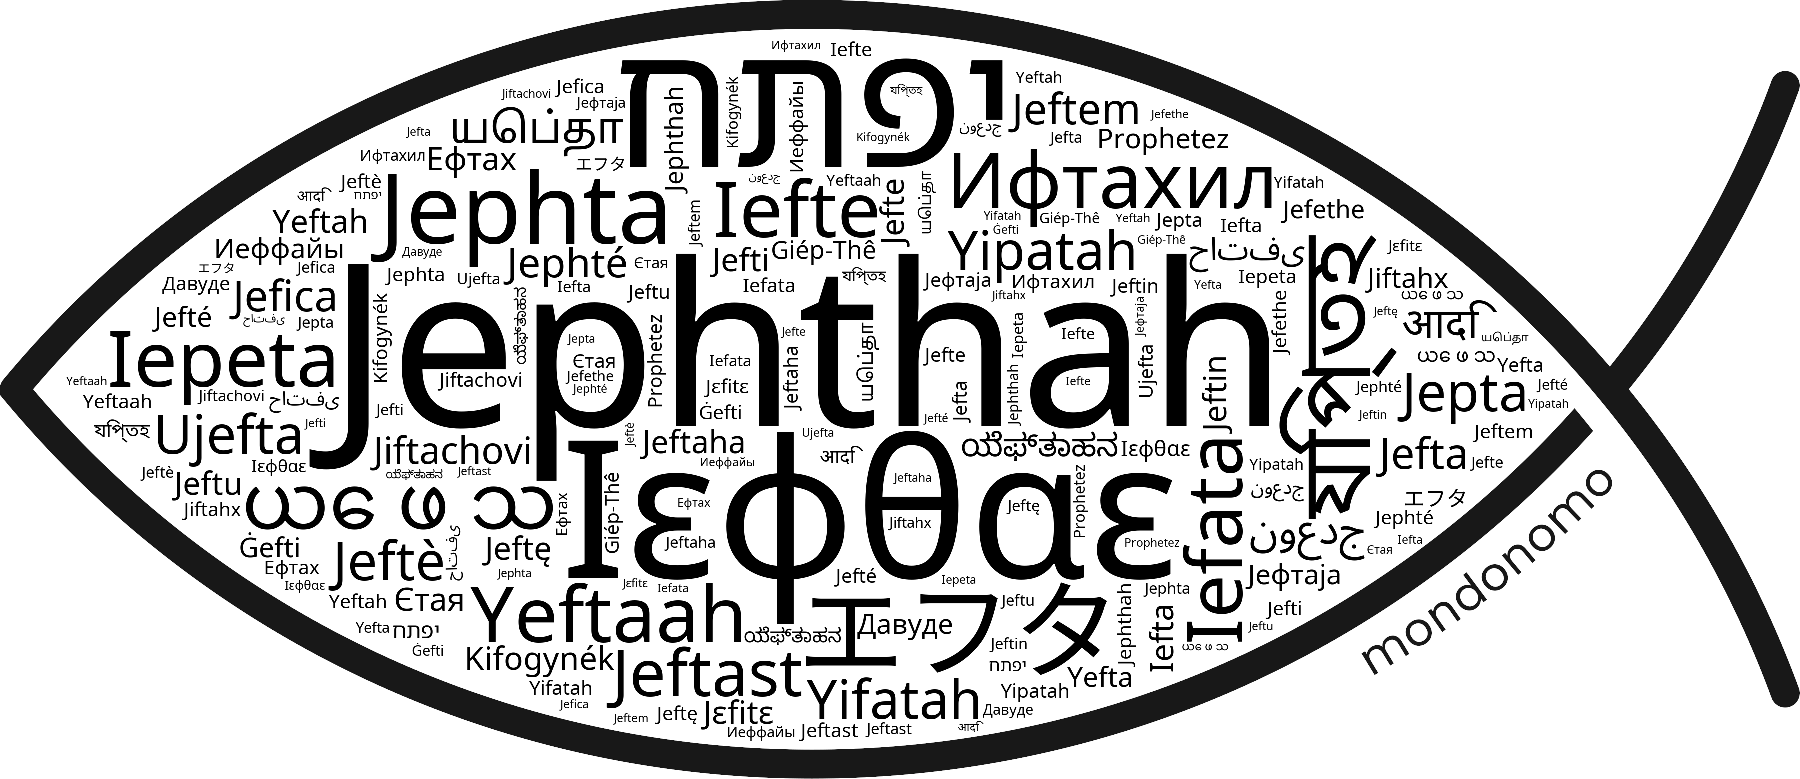 Name Jephthah in the world's Bibles